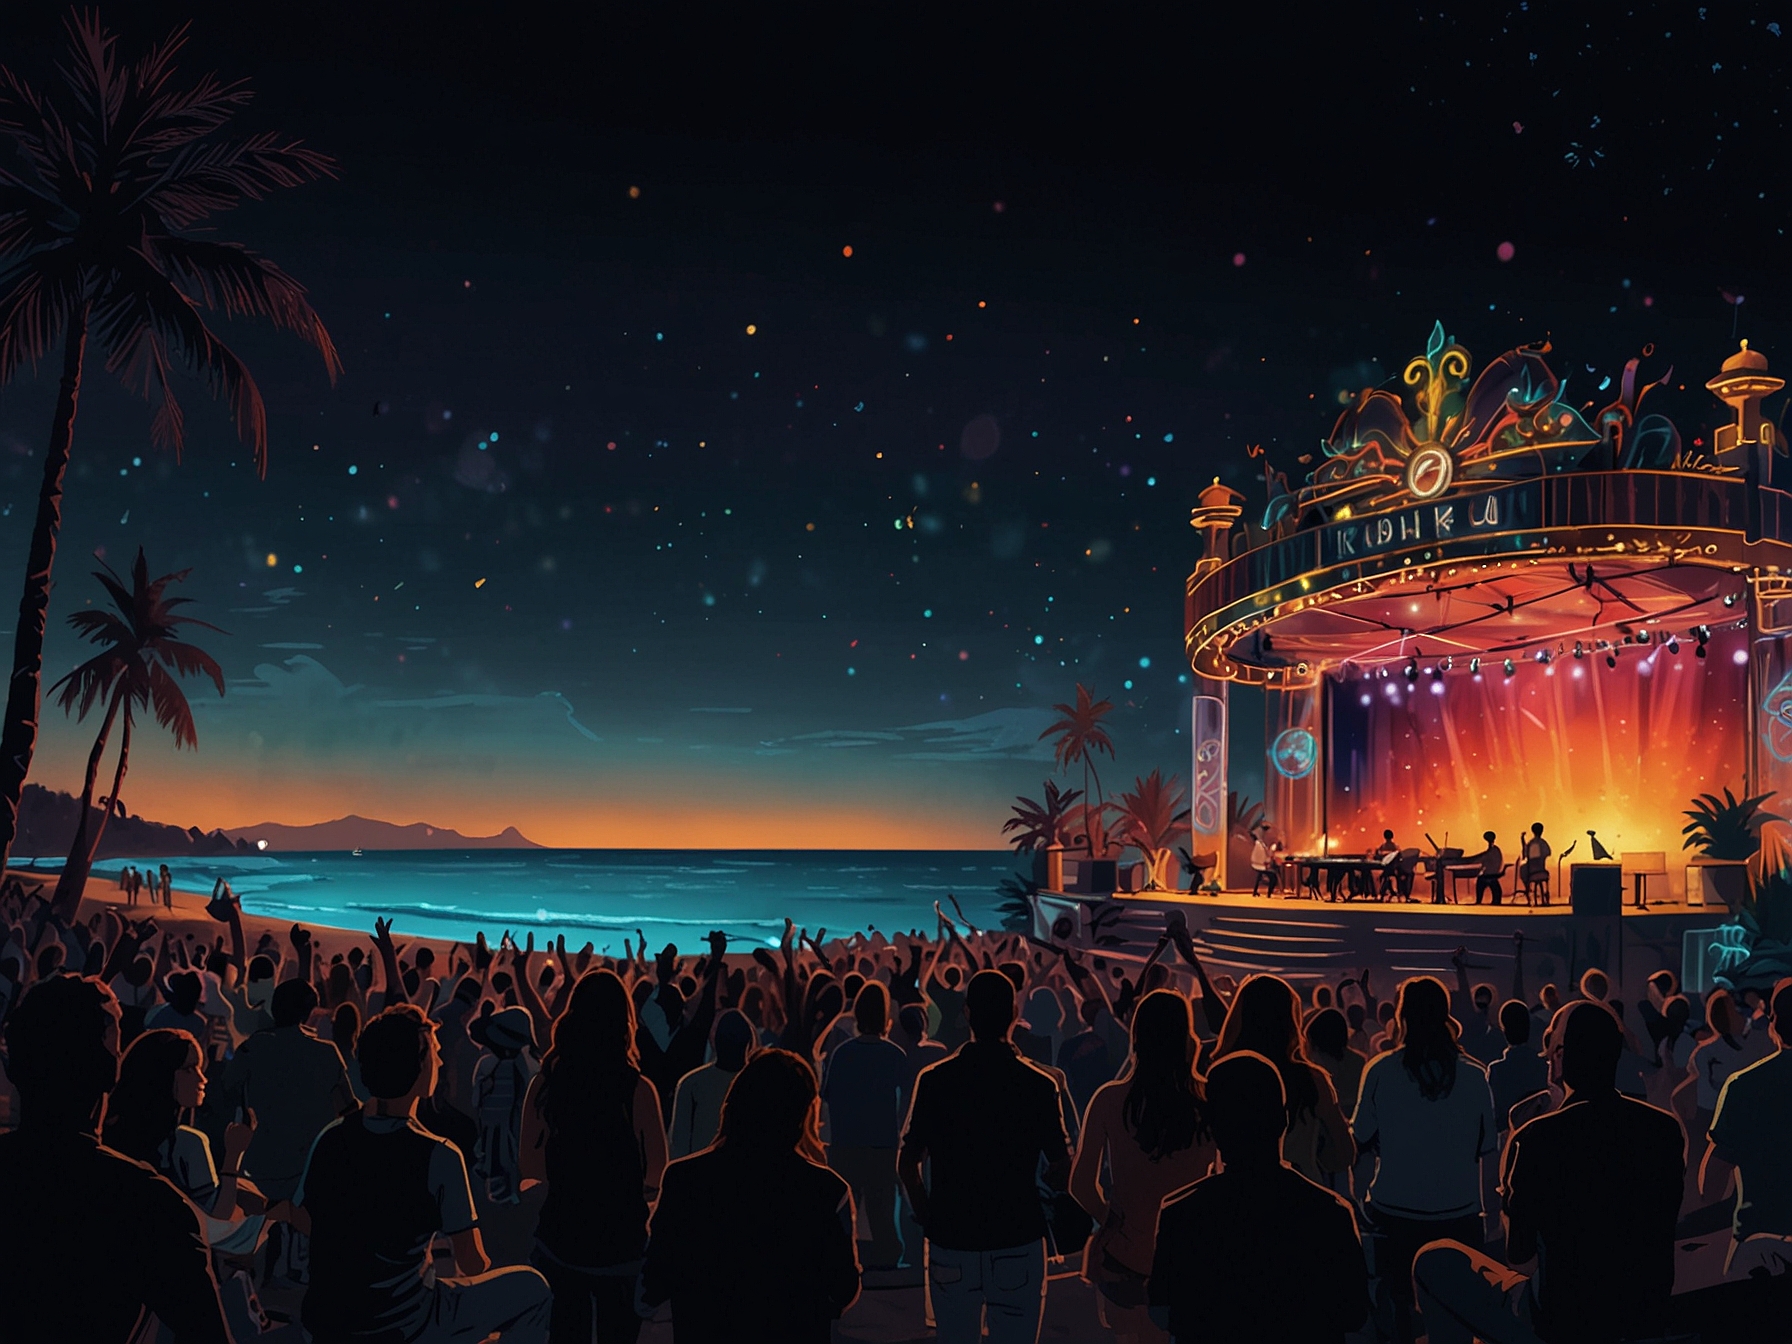 A vibrant evening concert at Paradise Park Stage, with a band performing live under twinkling lights and music lovers gathered, creating an electric atmosphere by the beach.